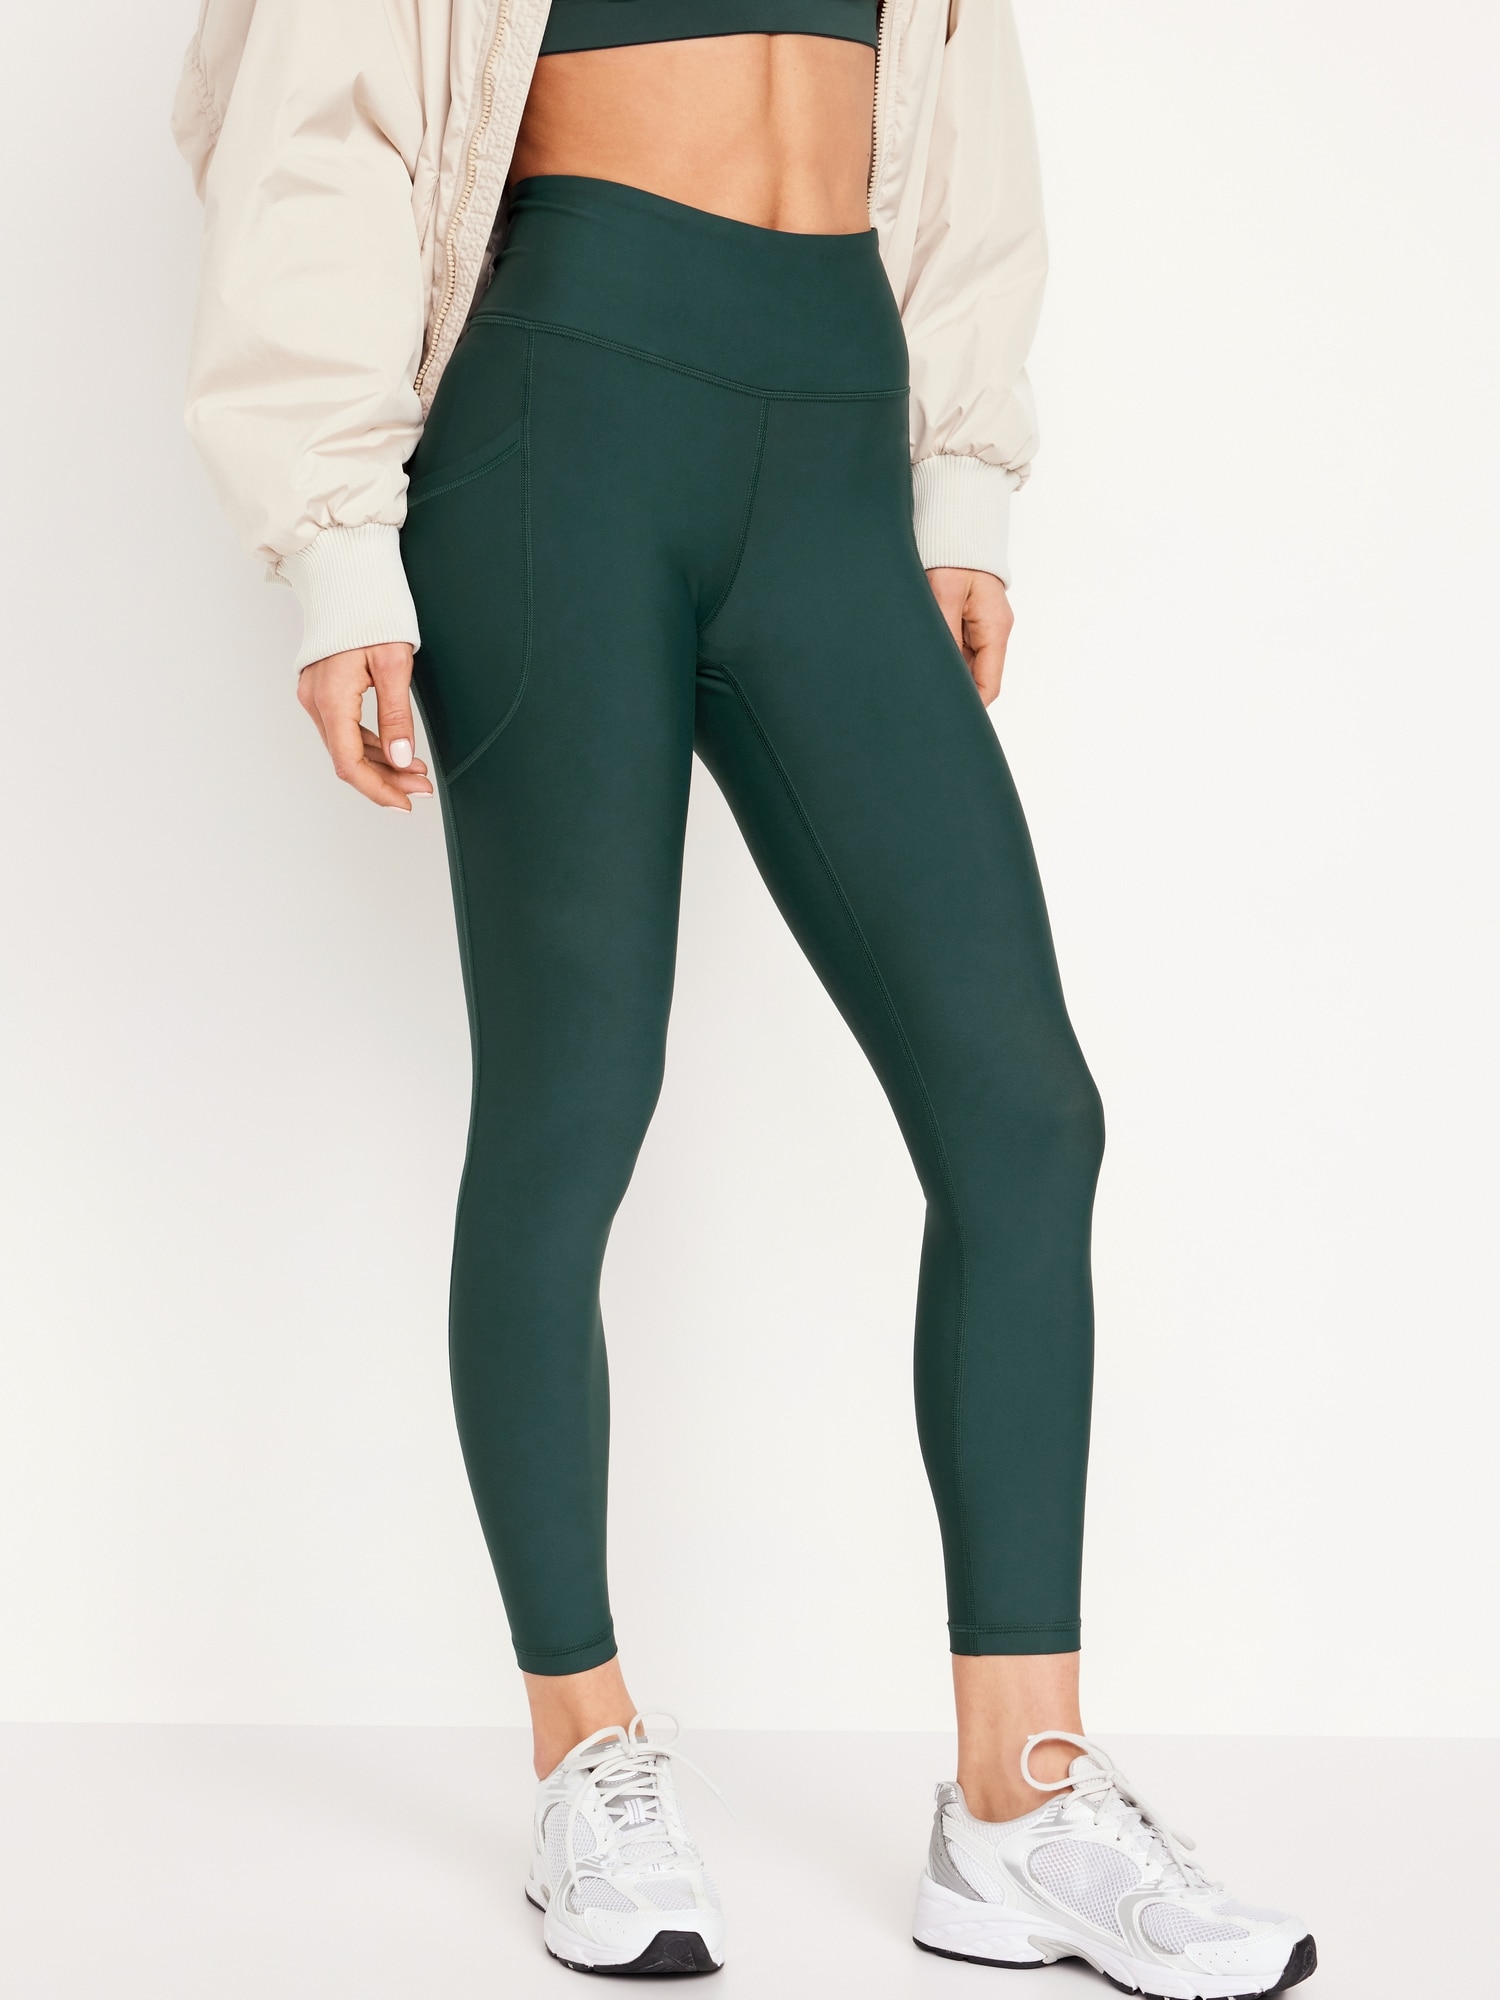 Old Navy High Waisted Powersoft Athletic Leggings 7/8 Briny Water Green XL  NEW